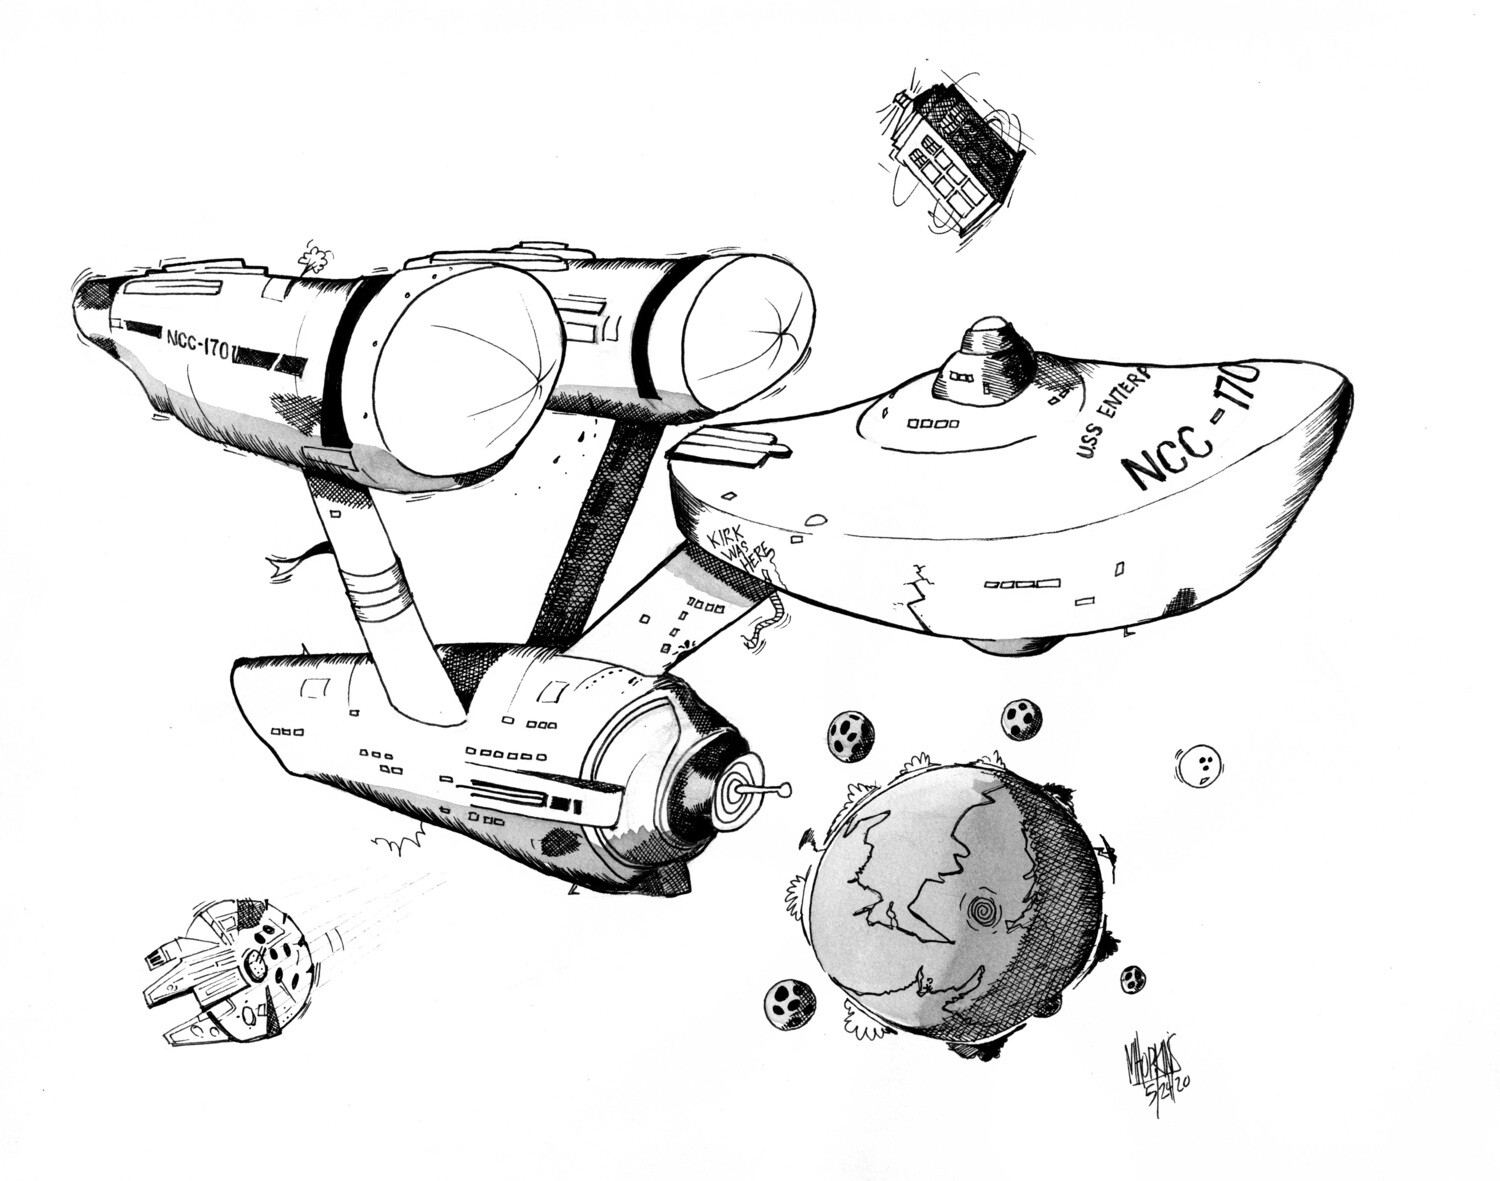 USS Enterprise - Caricature Limited Edition Giclée Prints from $50 to $100